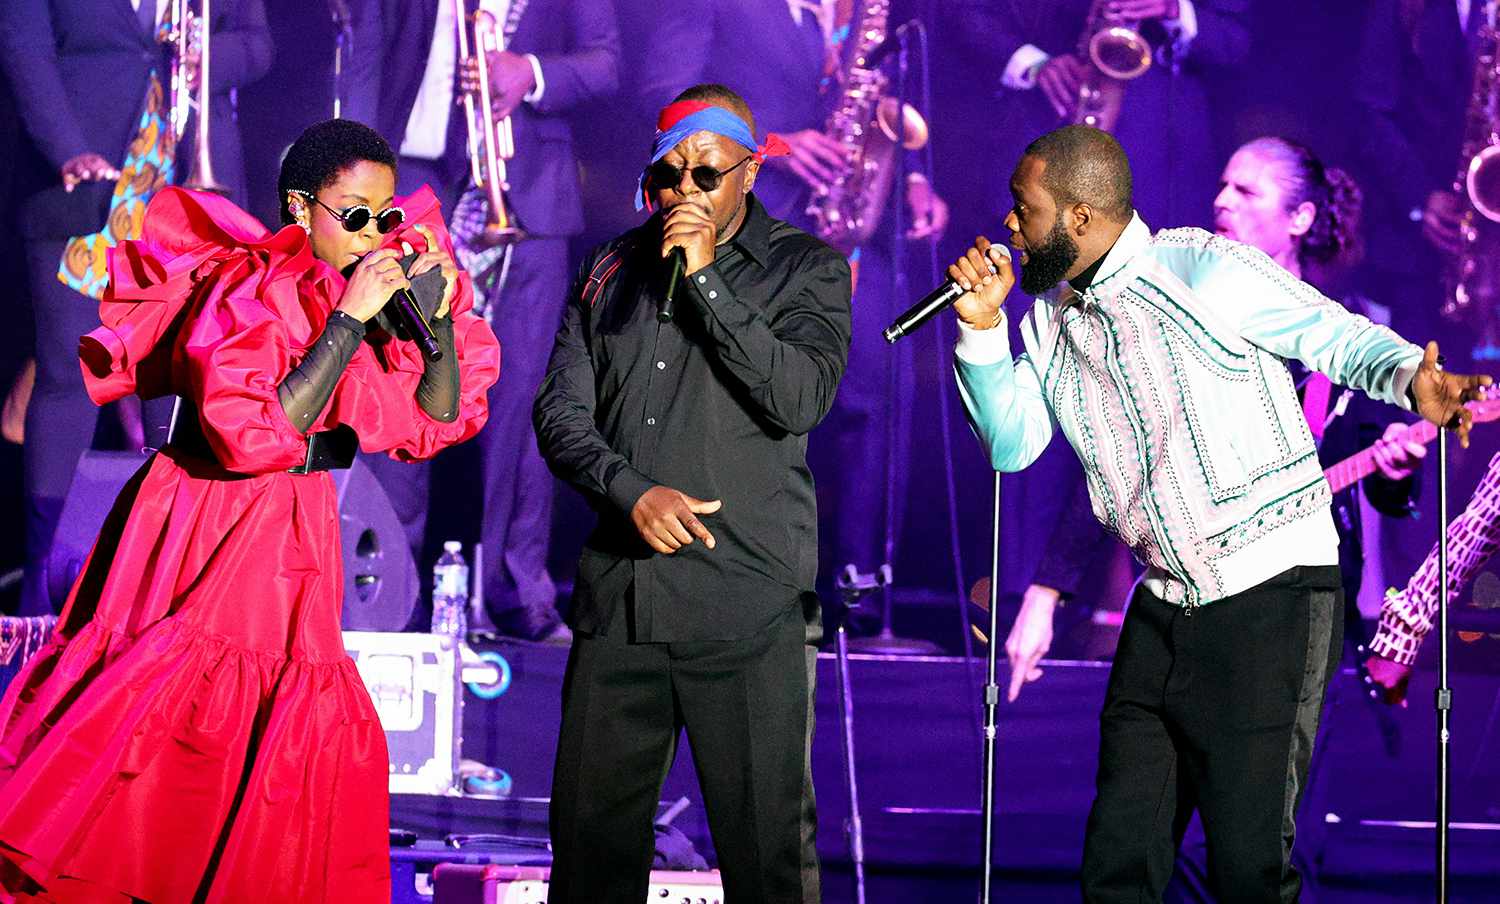 On Wed. 9/22, the reunited Fugees performed at Pier 17 in NYC in support of Global Citizen Live, a once-in-a-generation global broadcast event calling on world leaders to defend the planet and defeat poverty, airing on September 25. The show kicks off the Fugees 2021 World Tour.